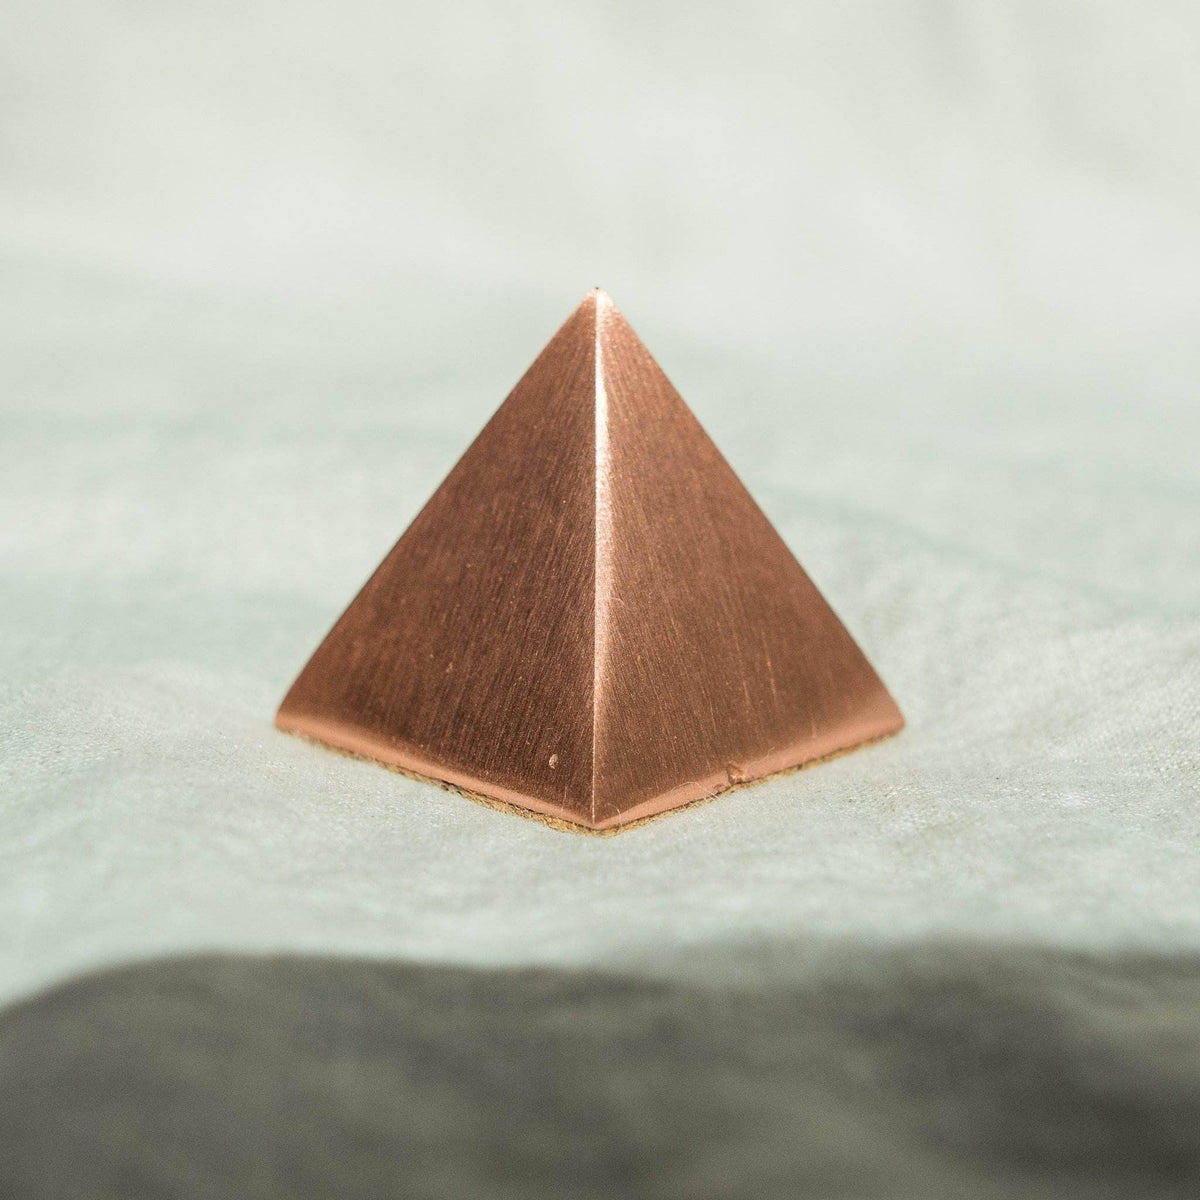 Copper Healing Pyramid by Tiny Rituals